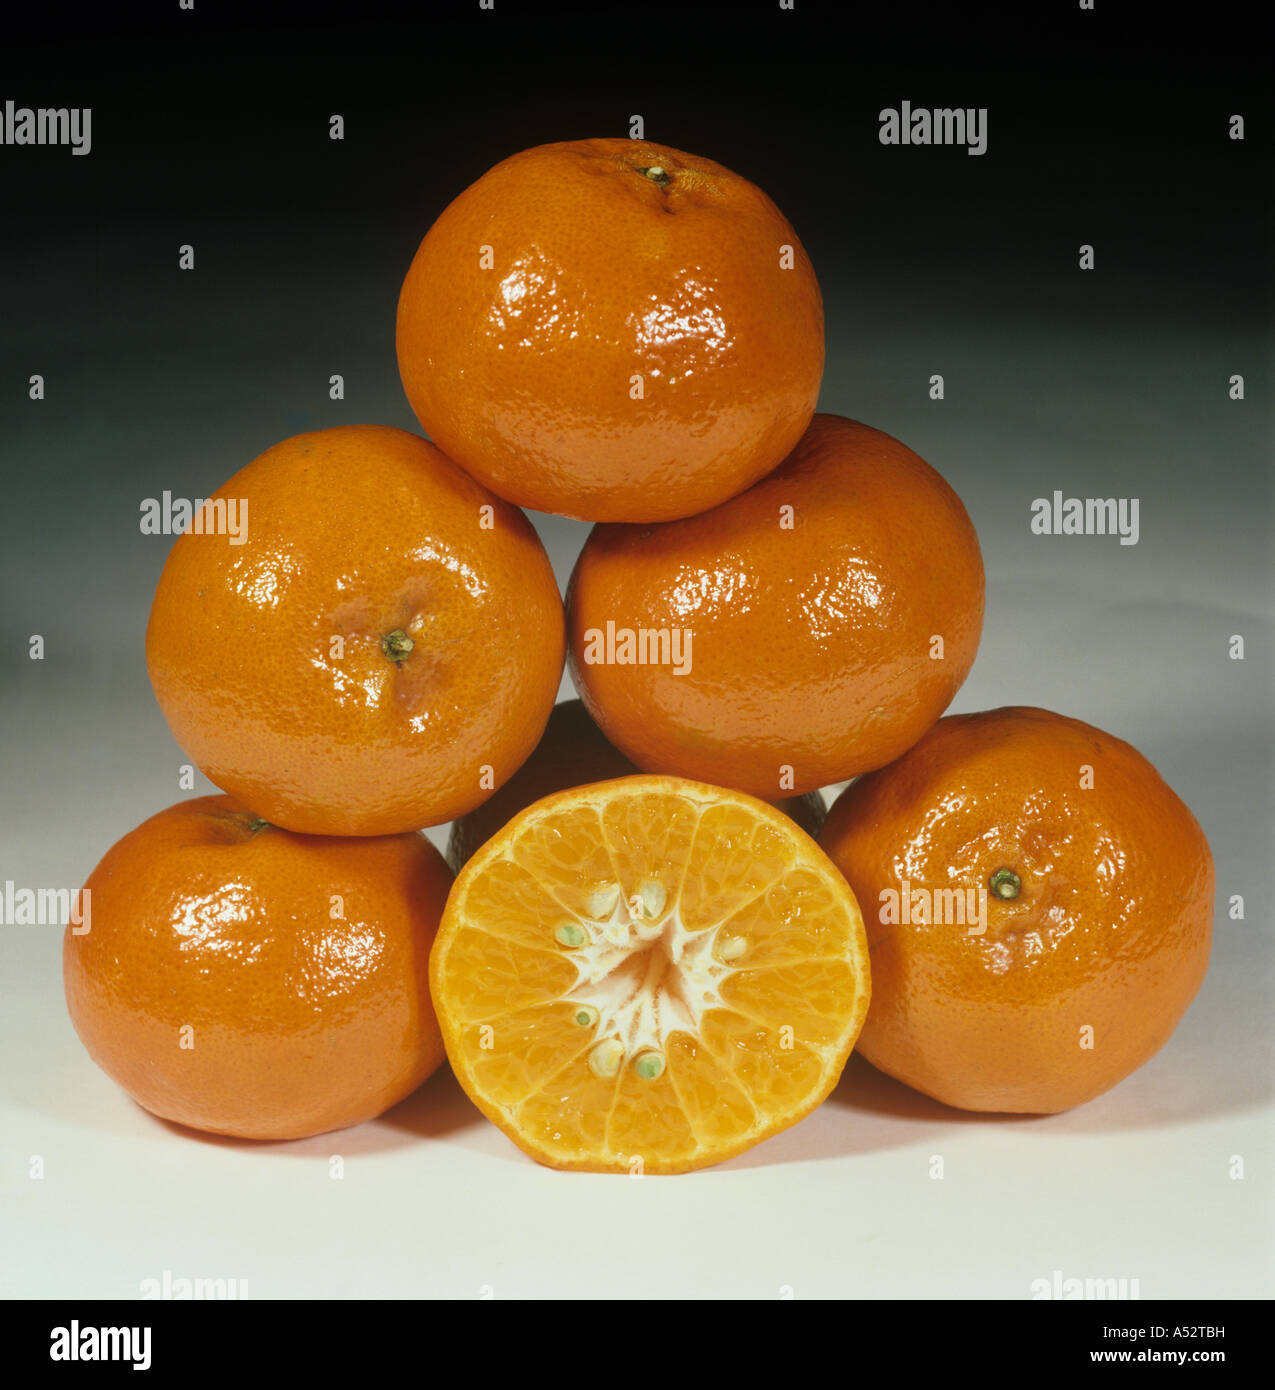 Whole and sectioned tangerine fruit variety Dancy Stock Photo